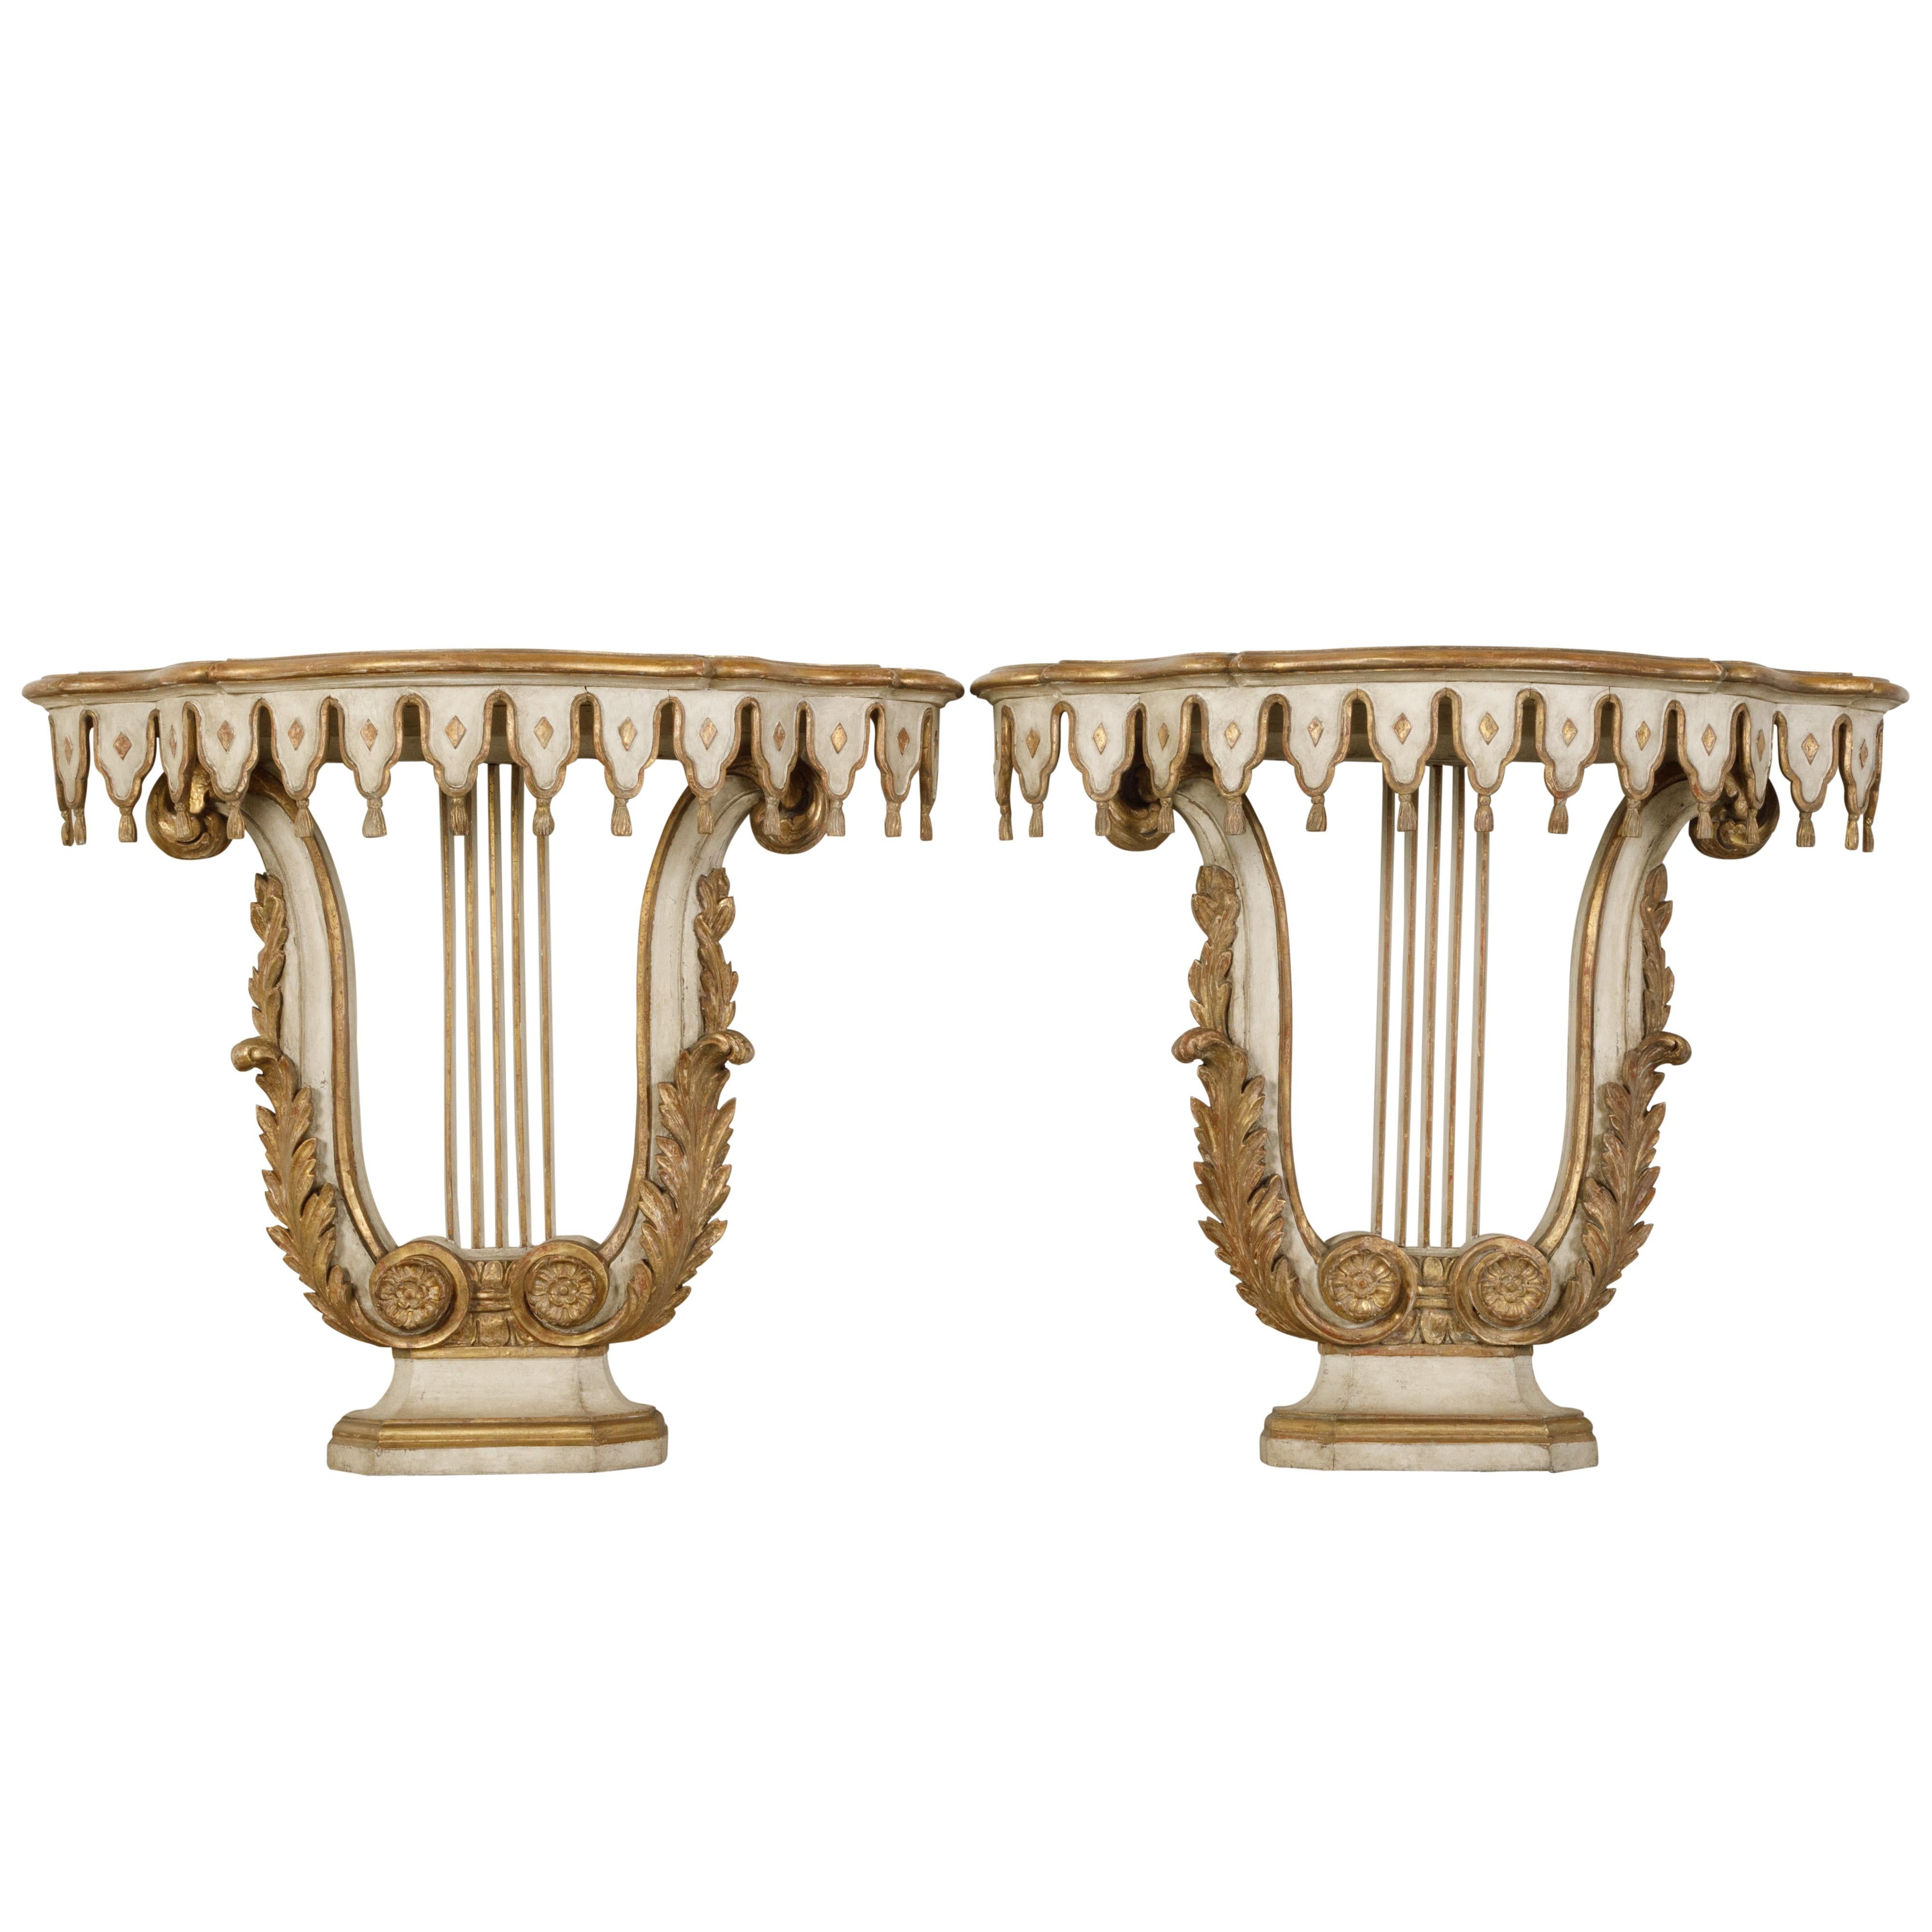 Pair of Italian Painted and Gilded Demilune Console Tables with Lyre Bases For Sale